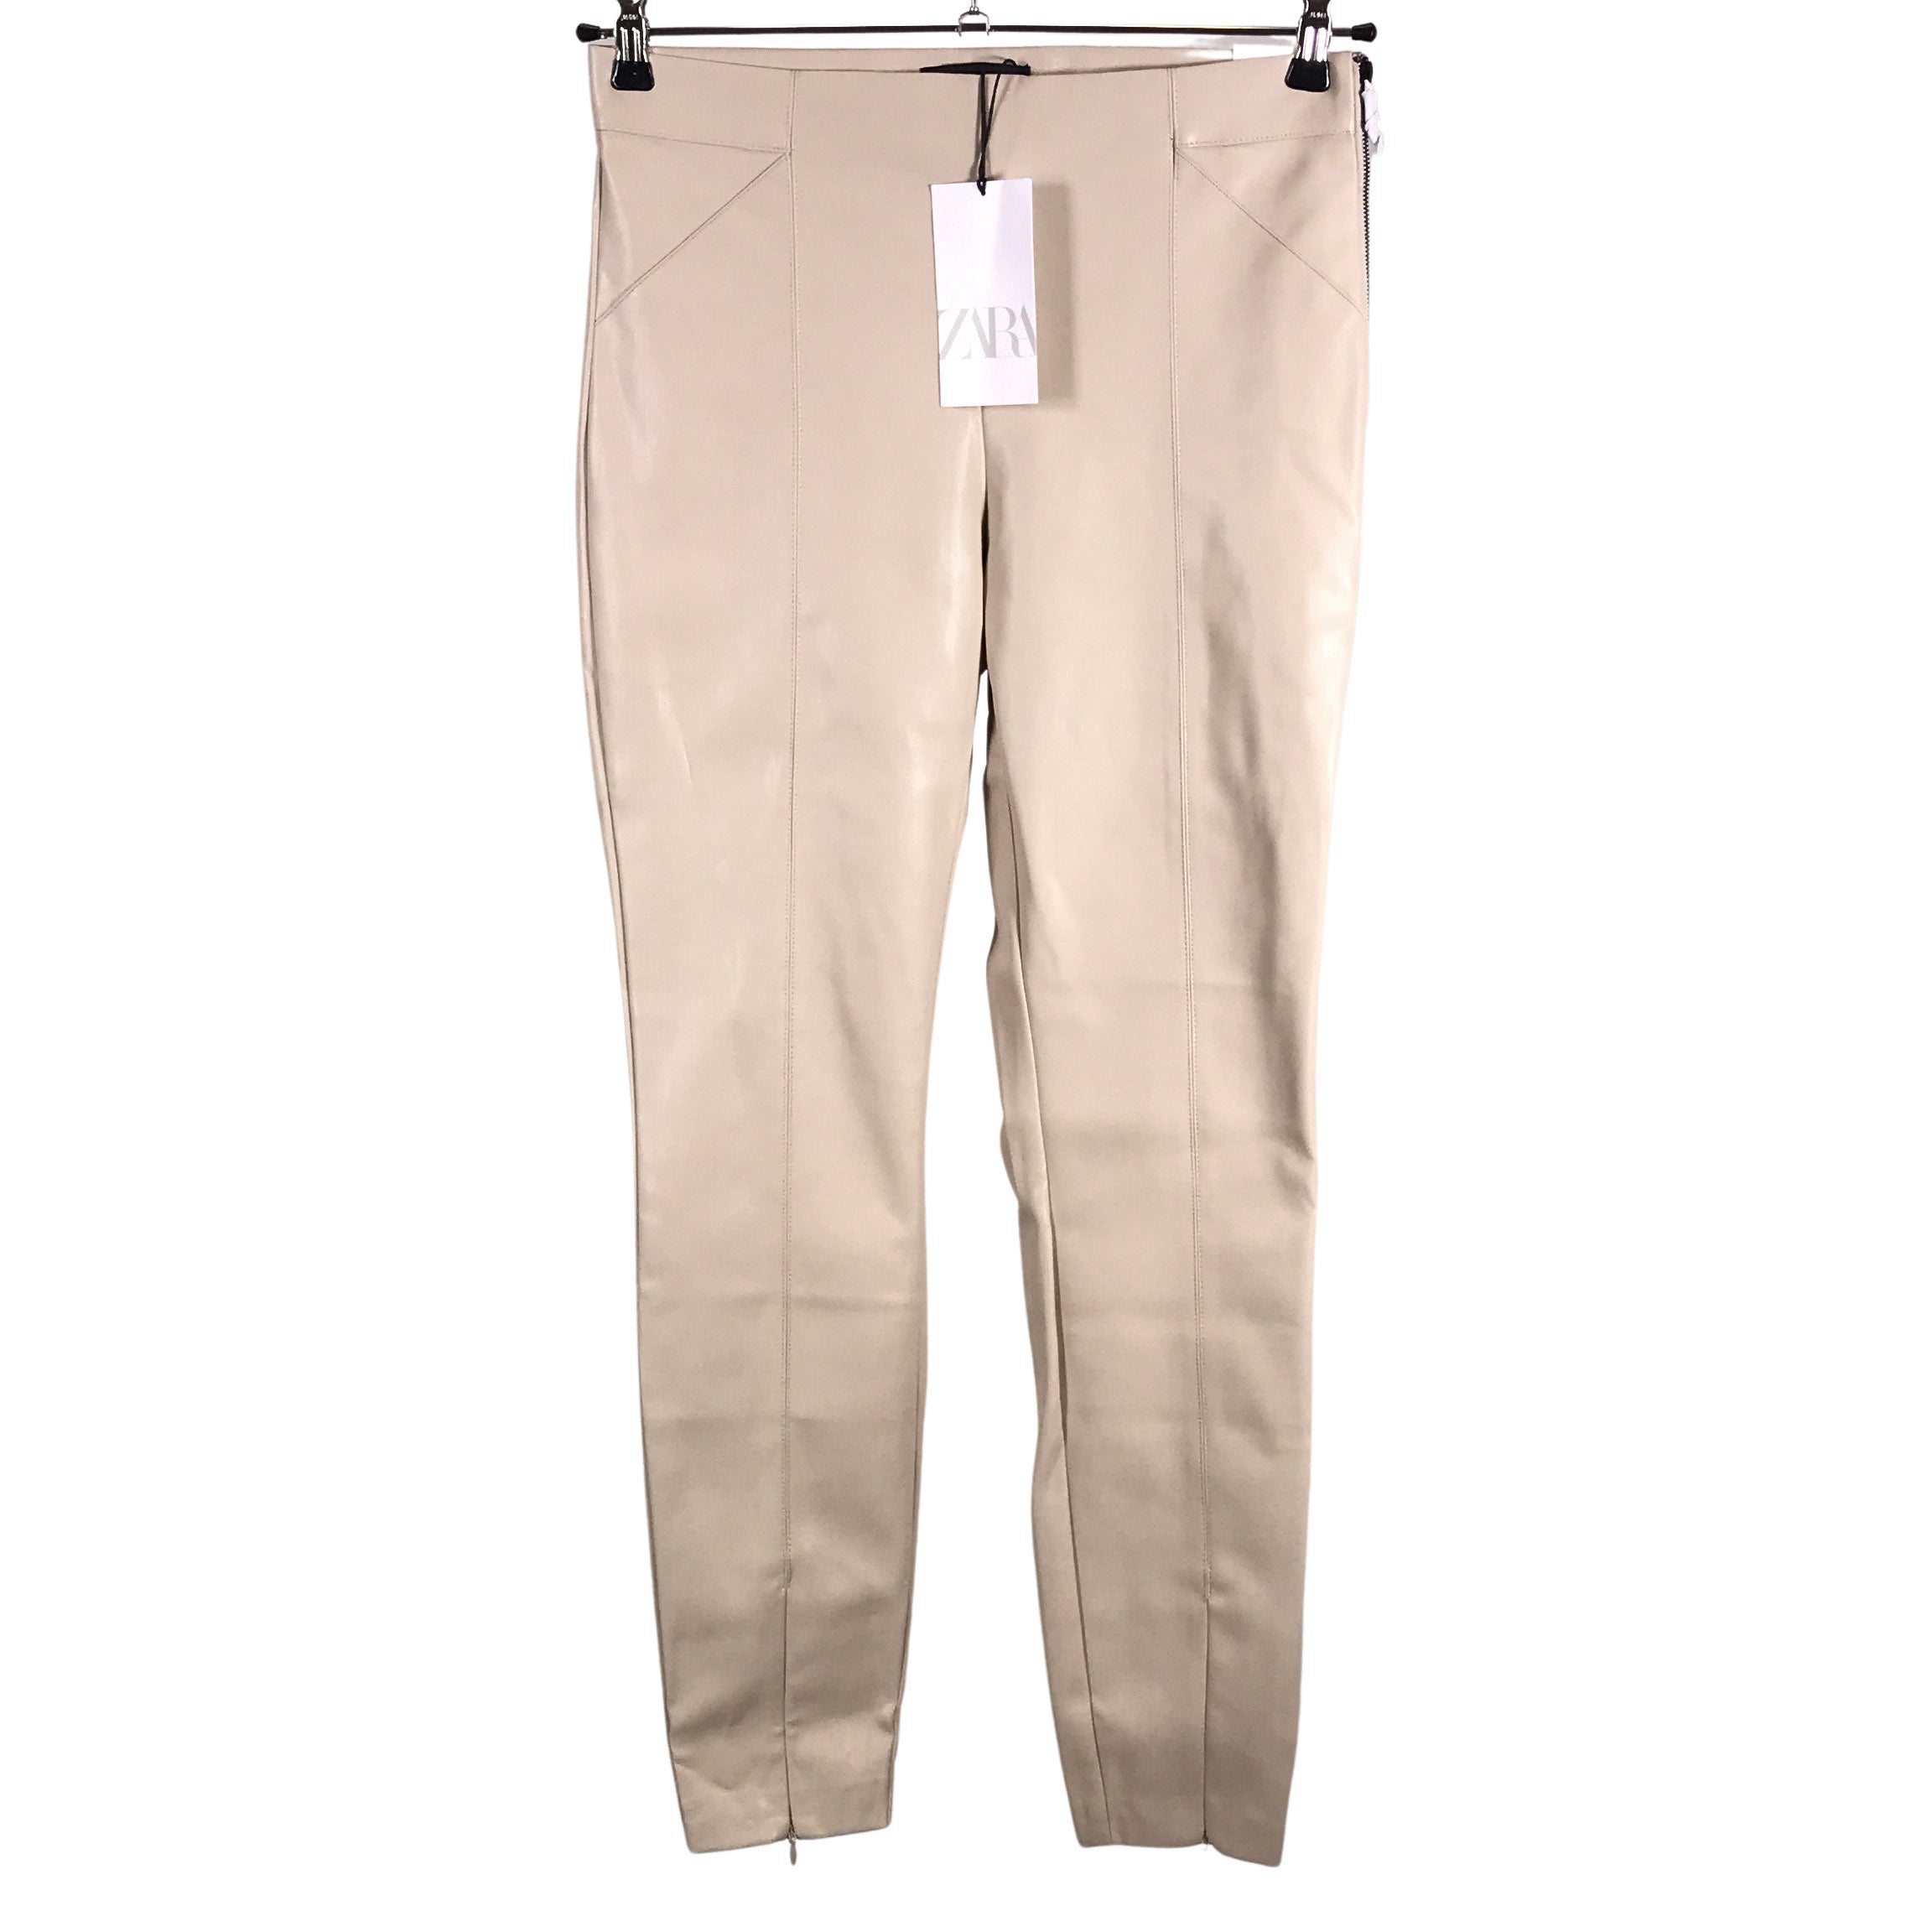 Jeans & Trousers | Zara Leather Trousers With Zip At Hem | Freeup